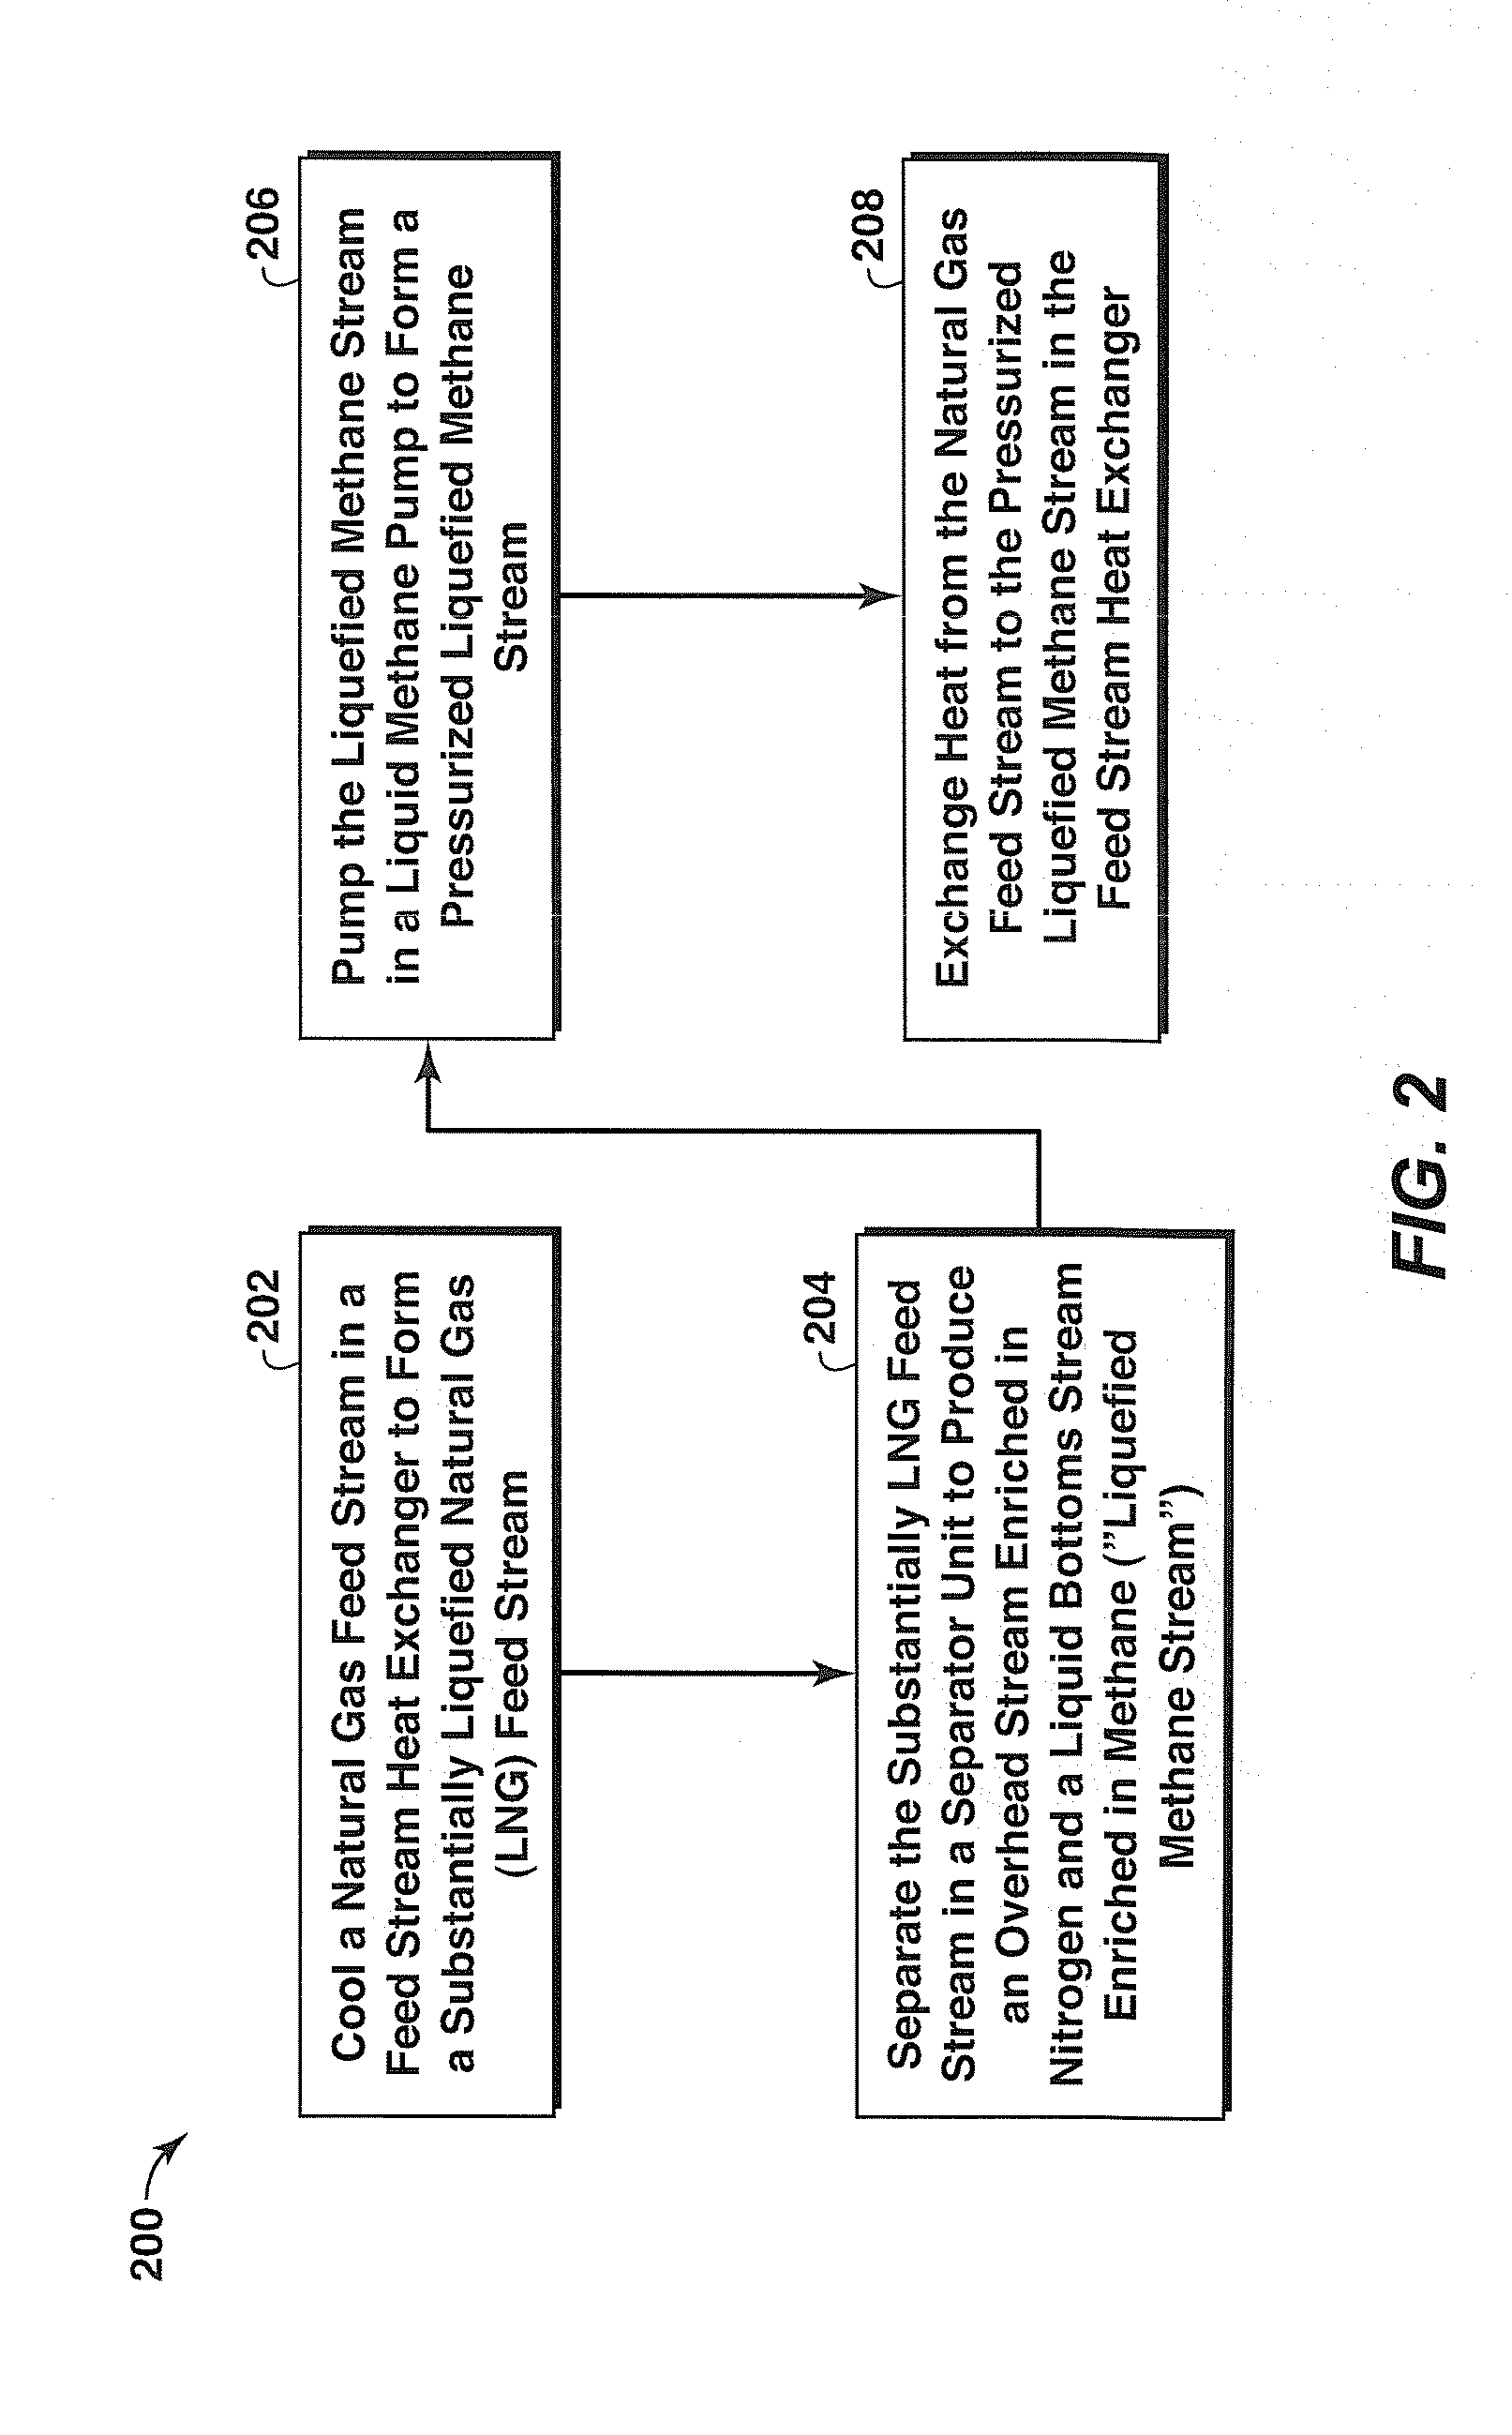 Nitrogen rejection methods and systems